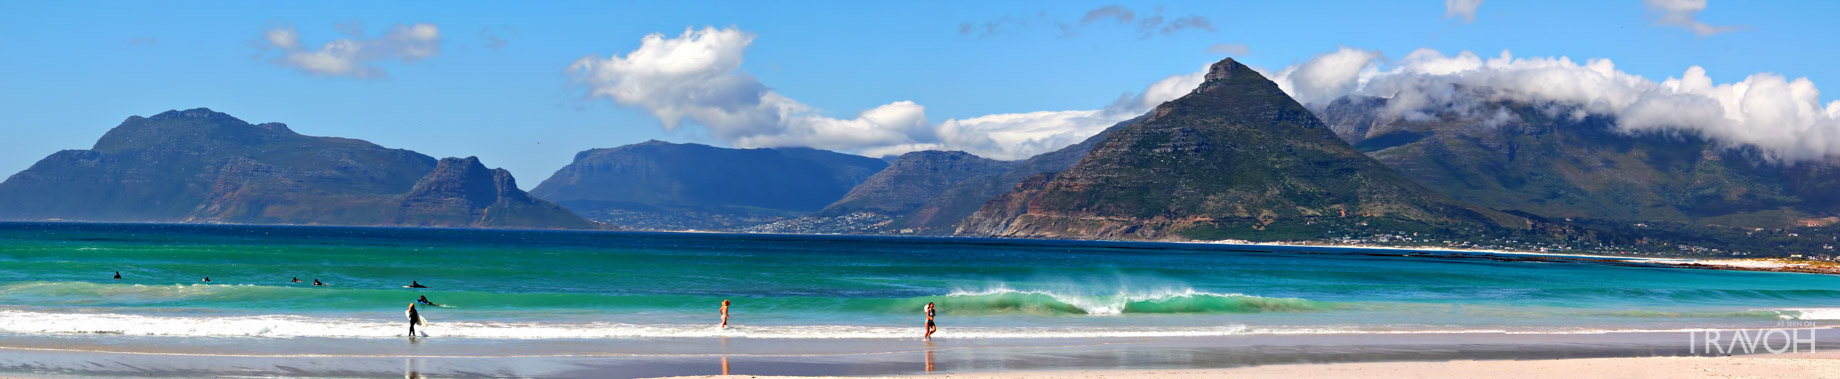 Long Beach – Exploring 10 of the Top Beaches in Cape Town, South Africa